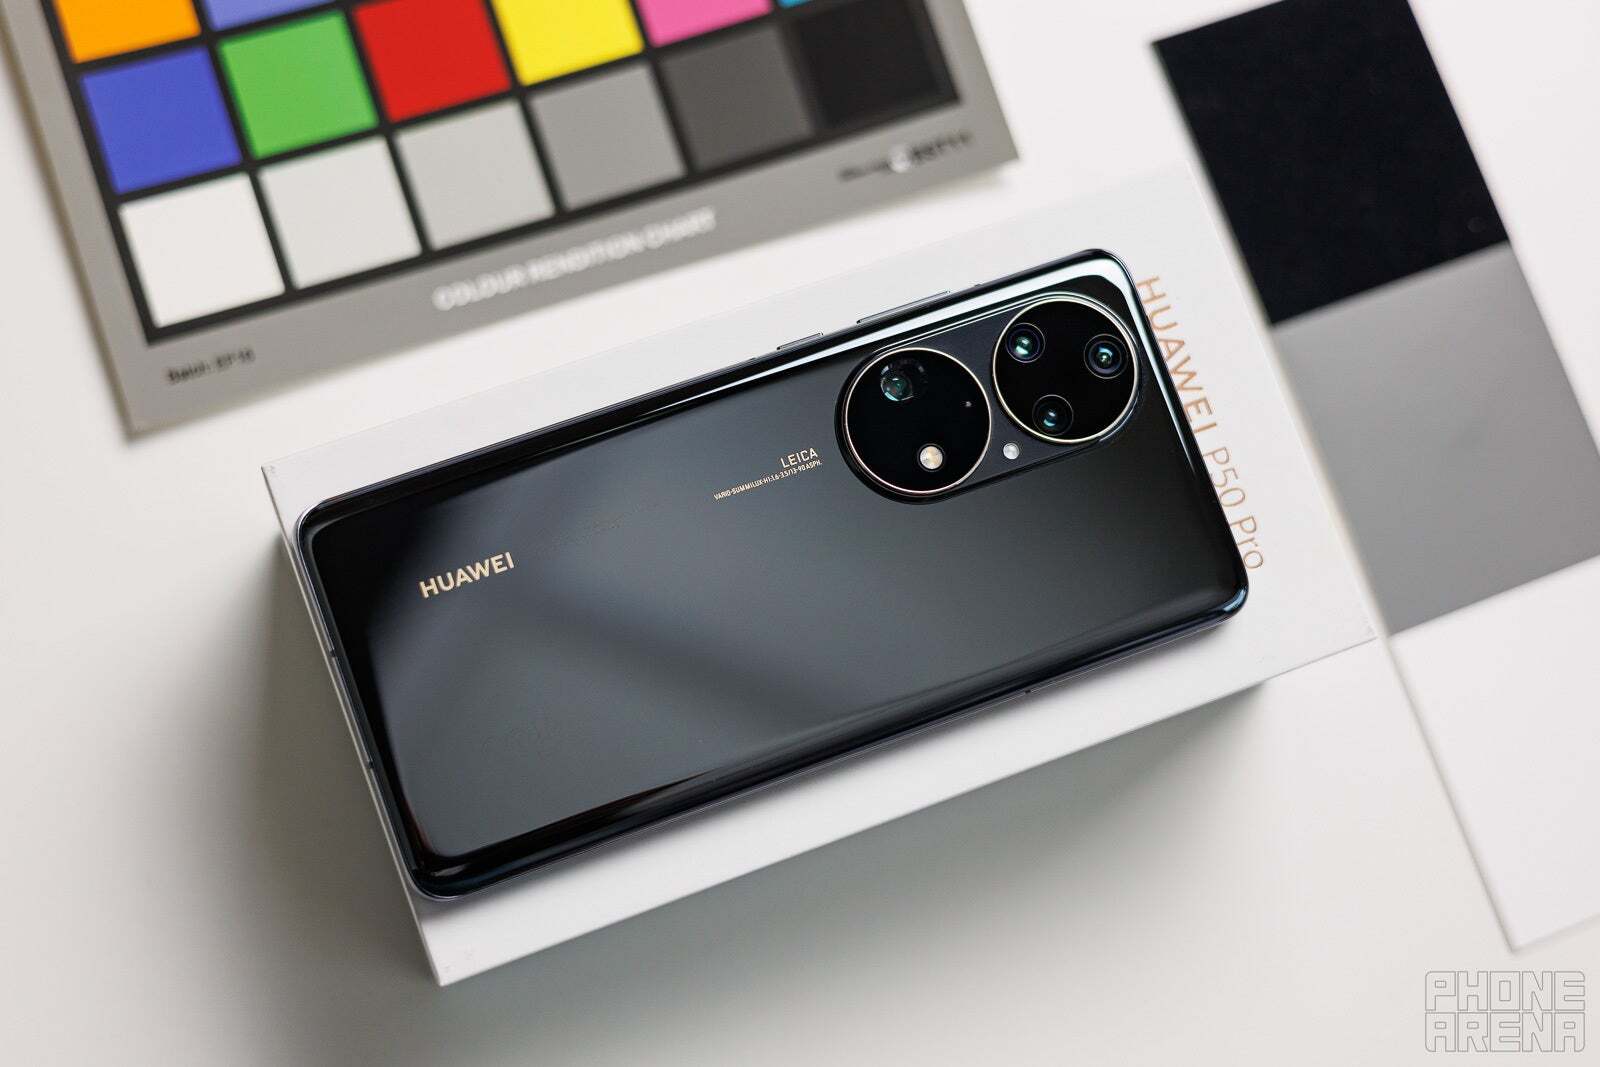 According to rumors, the Huawei P50 Pro - OnePlus, Oppo partnership with Hasselblad is coming to an end.  What does this mean for your photos?